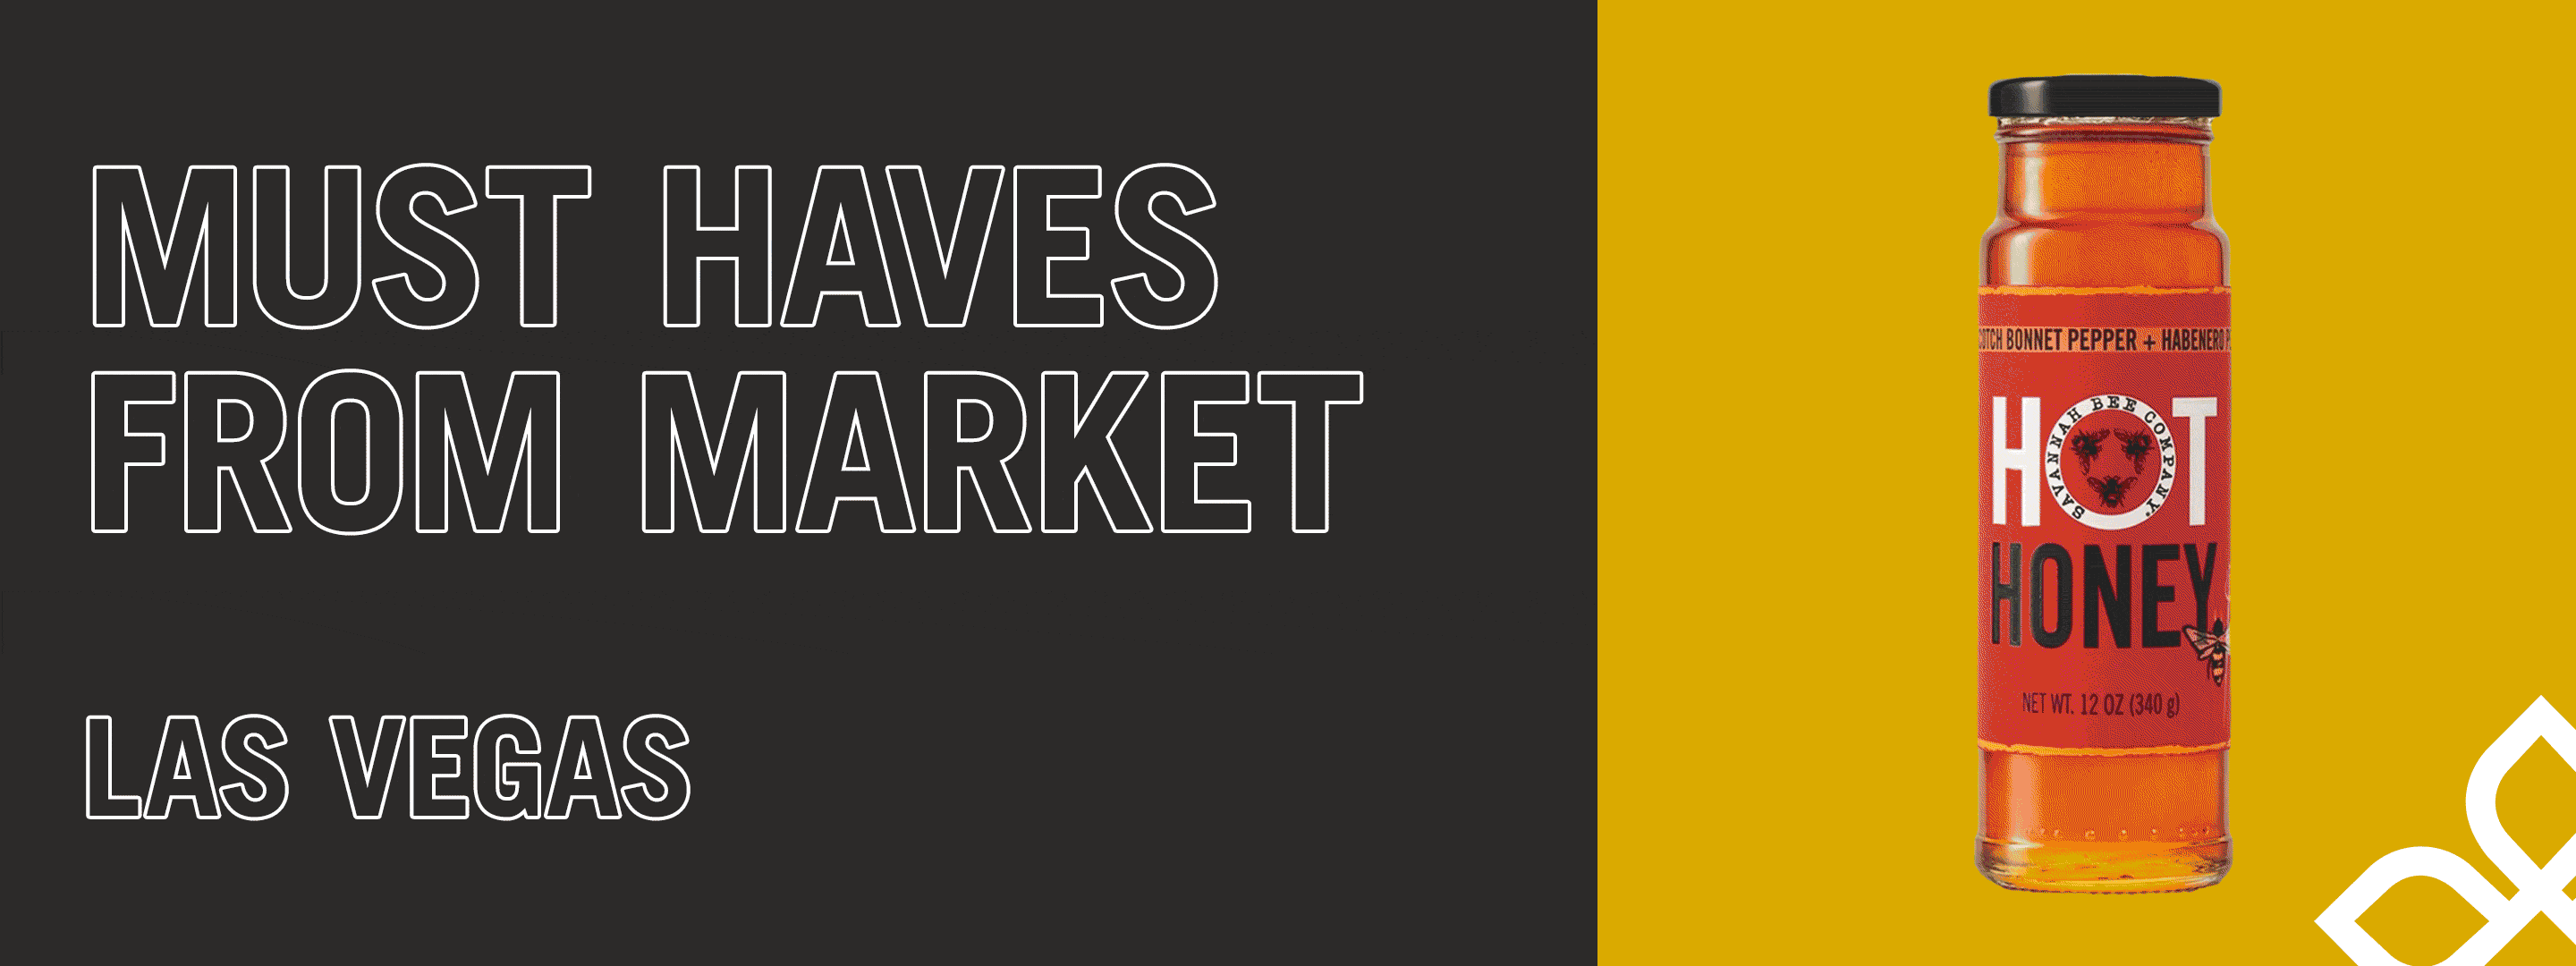 Blog: Must Haves from Market